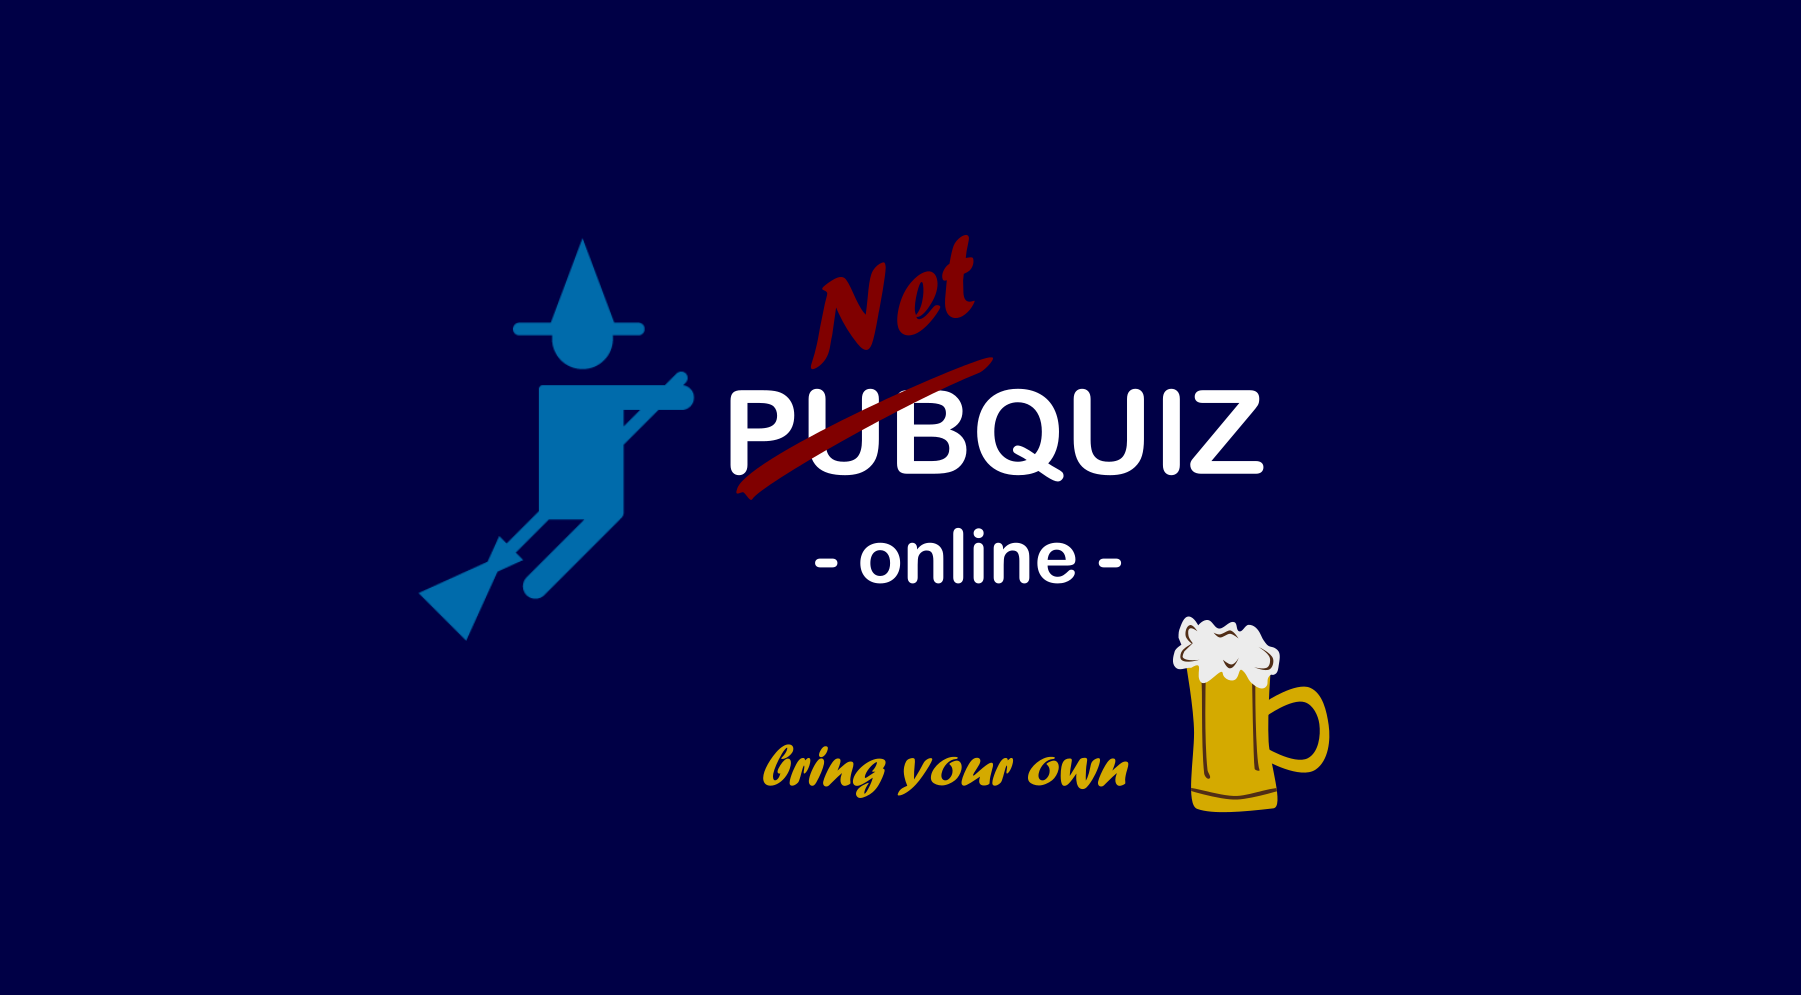 Join our new “NetQuiz” event!